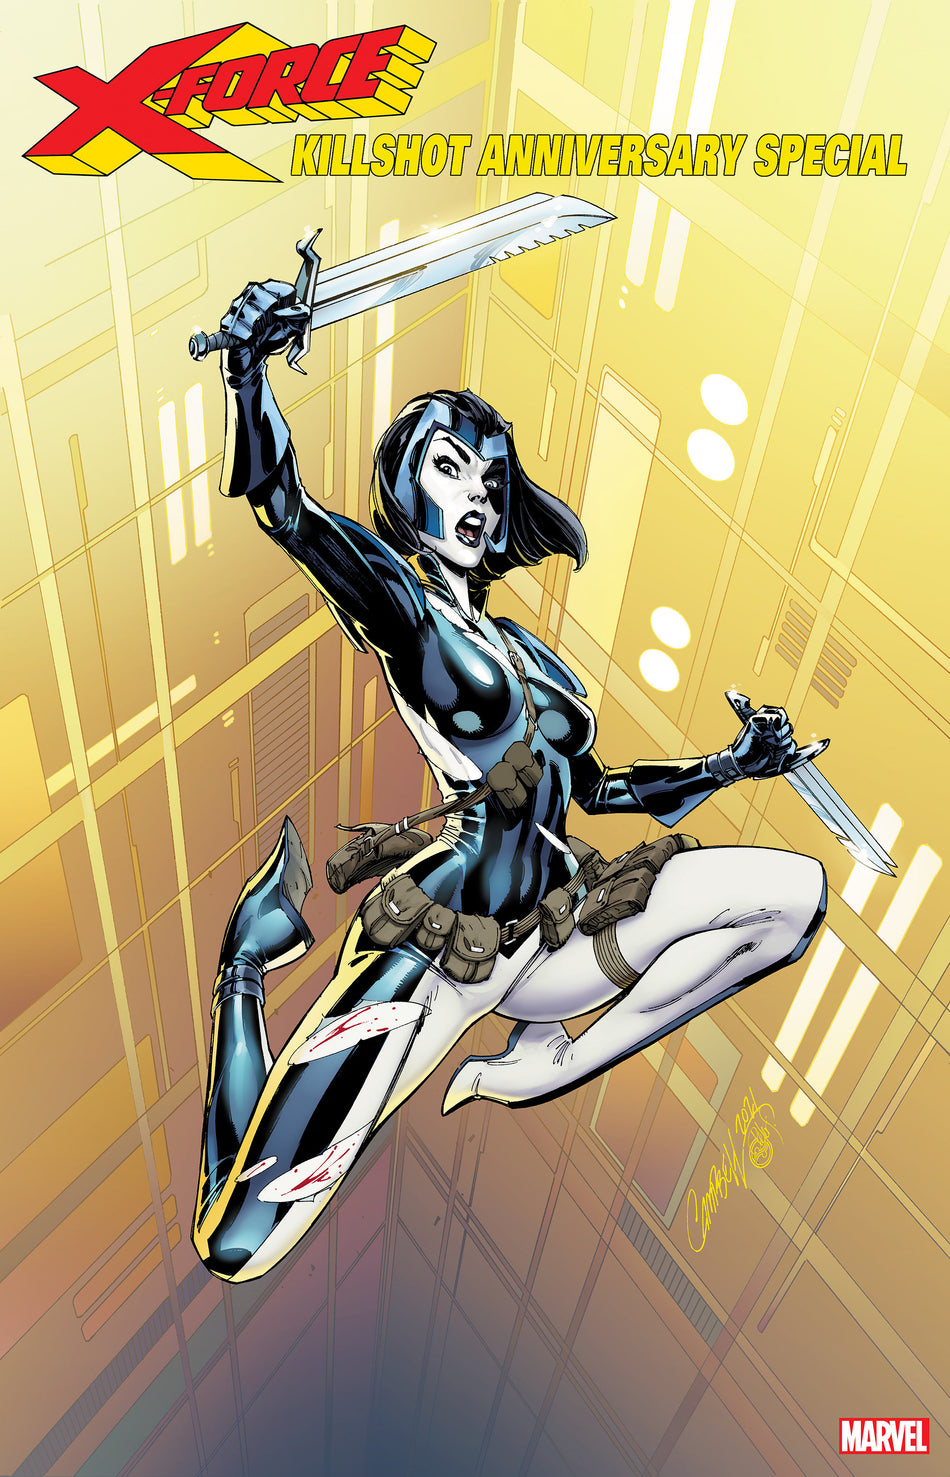 Image of X-Force: Killshot Anniversary Special 1 Jsc Domino Variant comic sold by Stronghold Collectibles.